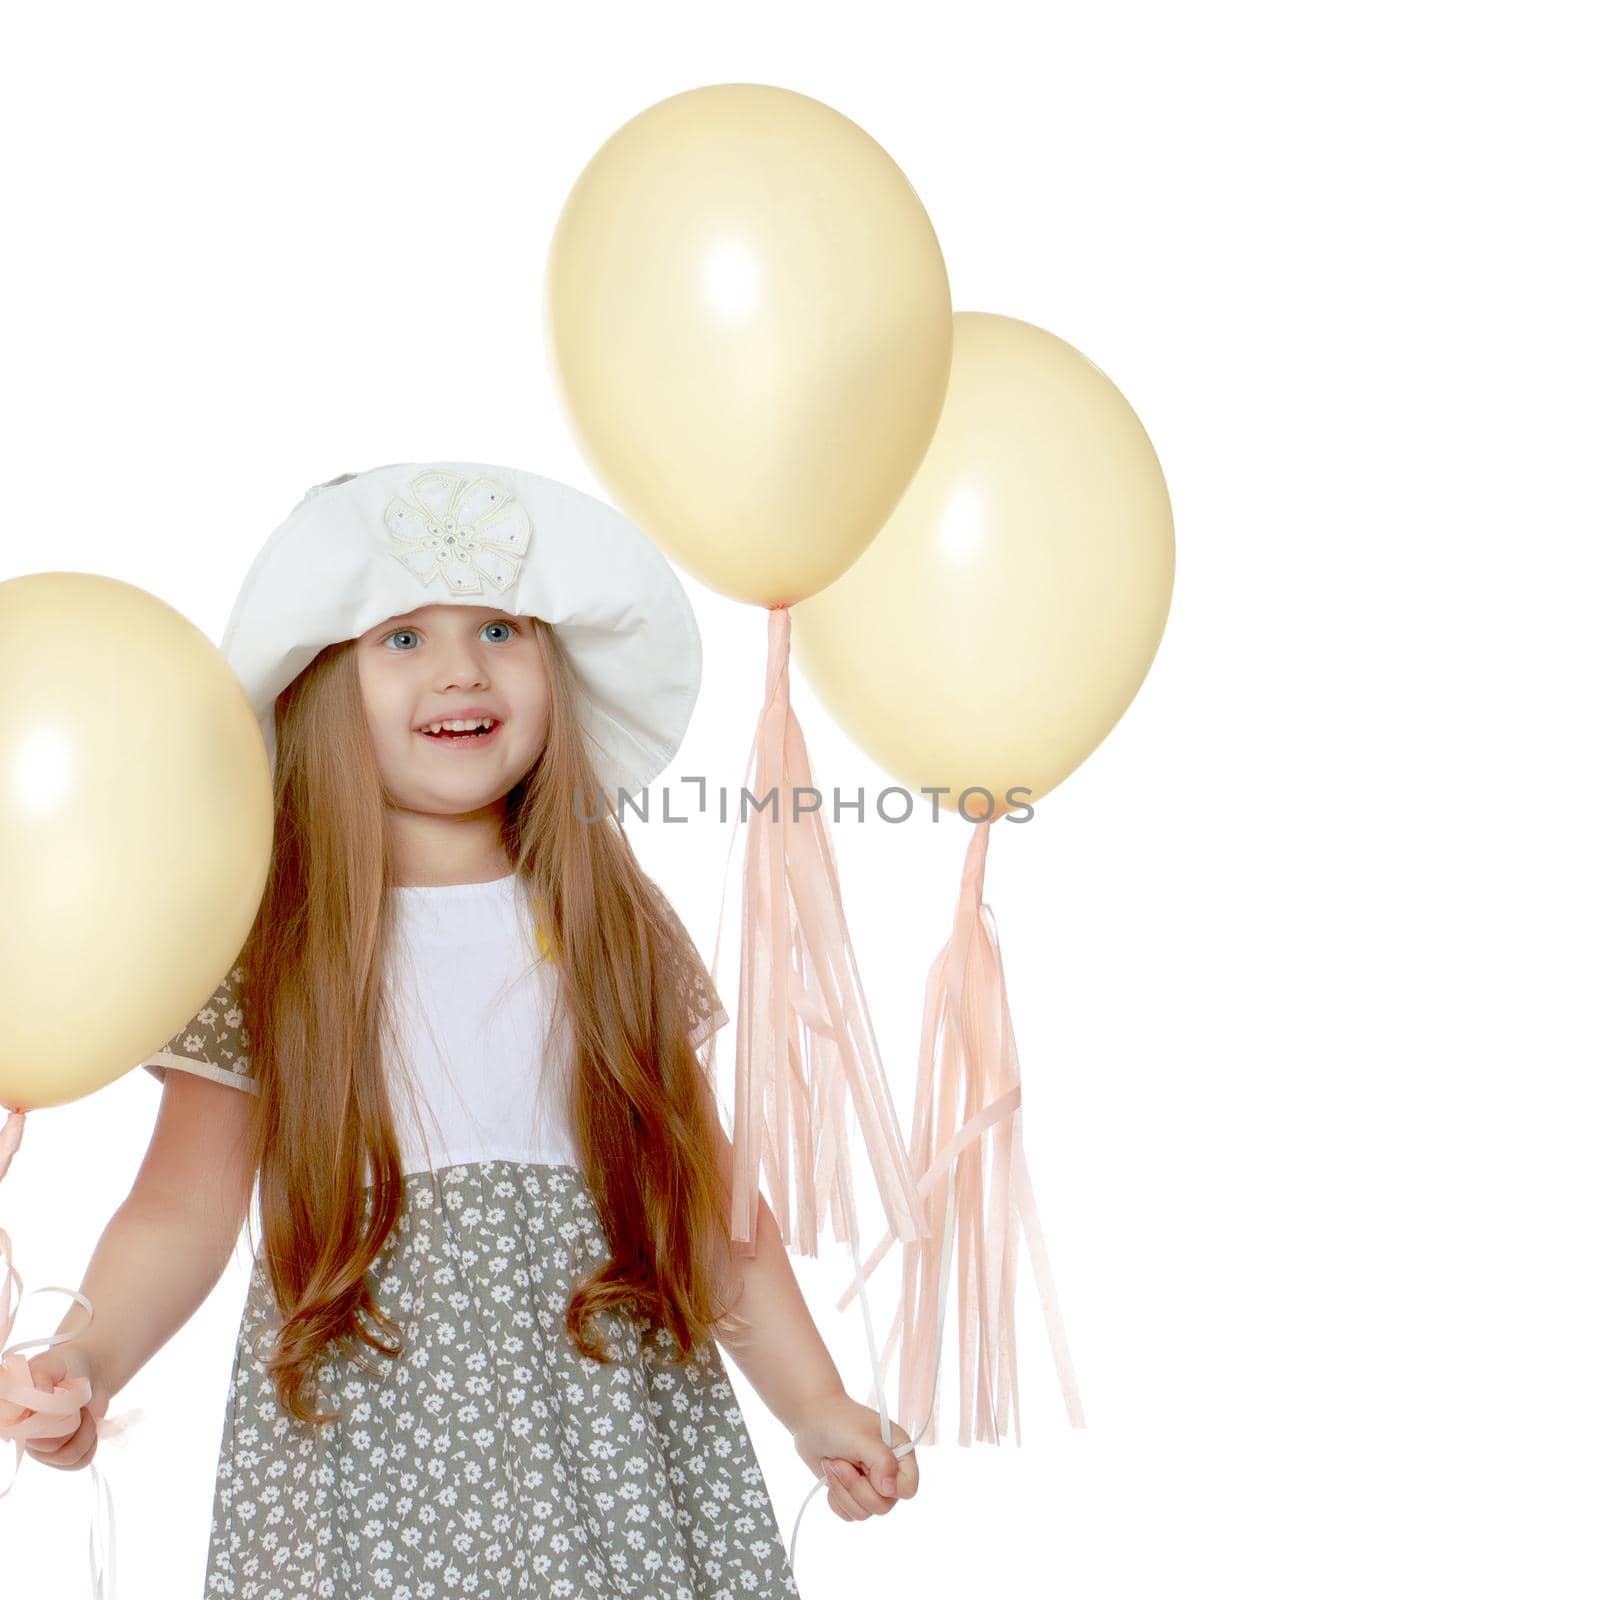 Little girl is playing with a balloon by kolesnikov_studio